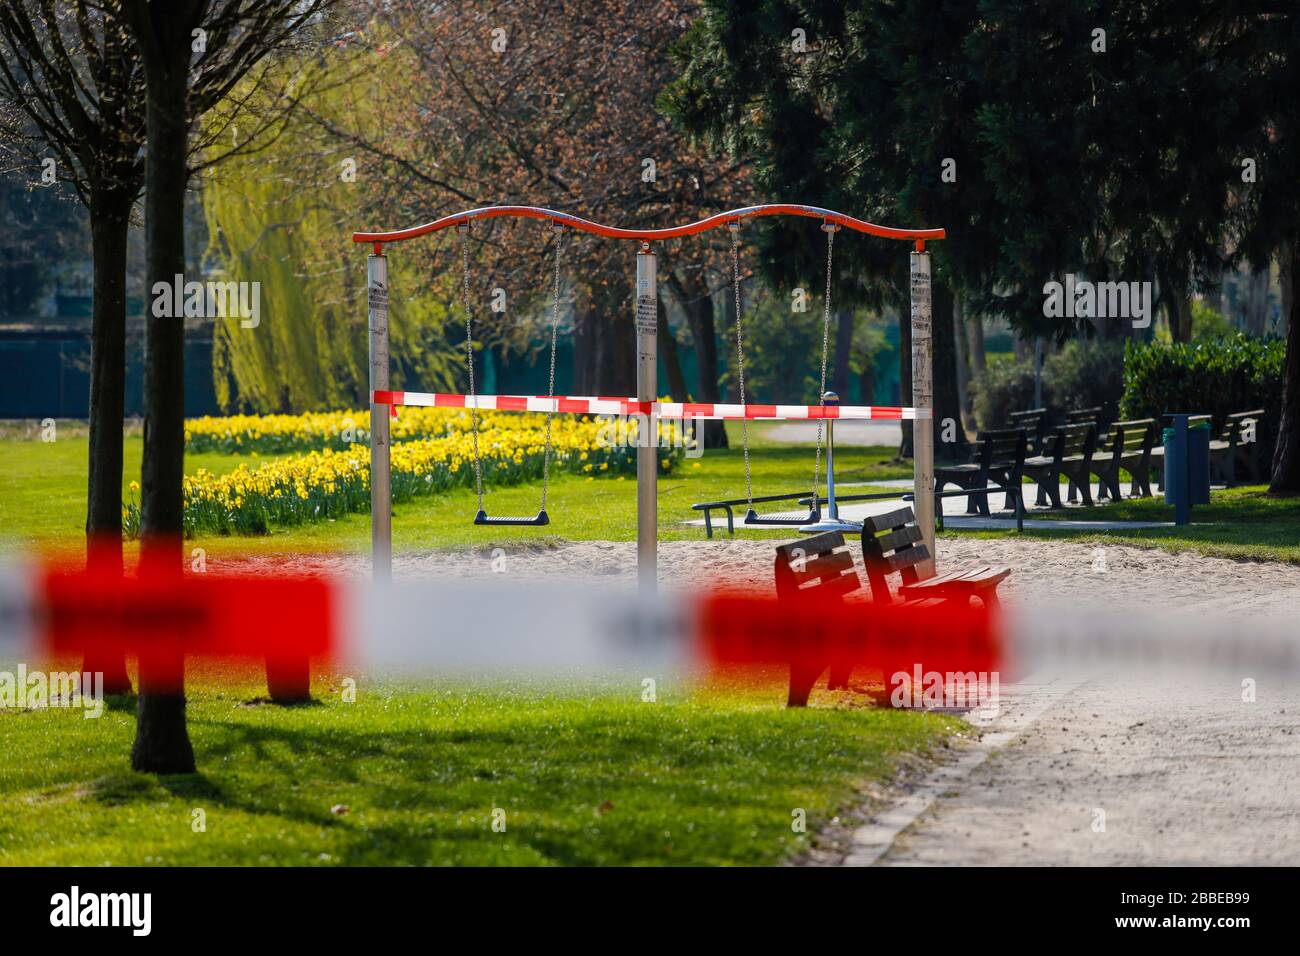 Essen, Ruhr Area, North Rhine-Westphalia, Germany - Contact ban due to Corona Pandemic, the park at Haumannplatz was closed because too many citizens Stock Photo